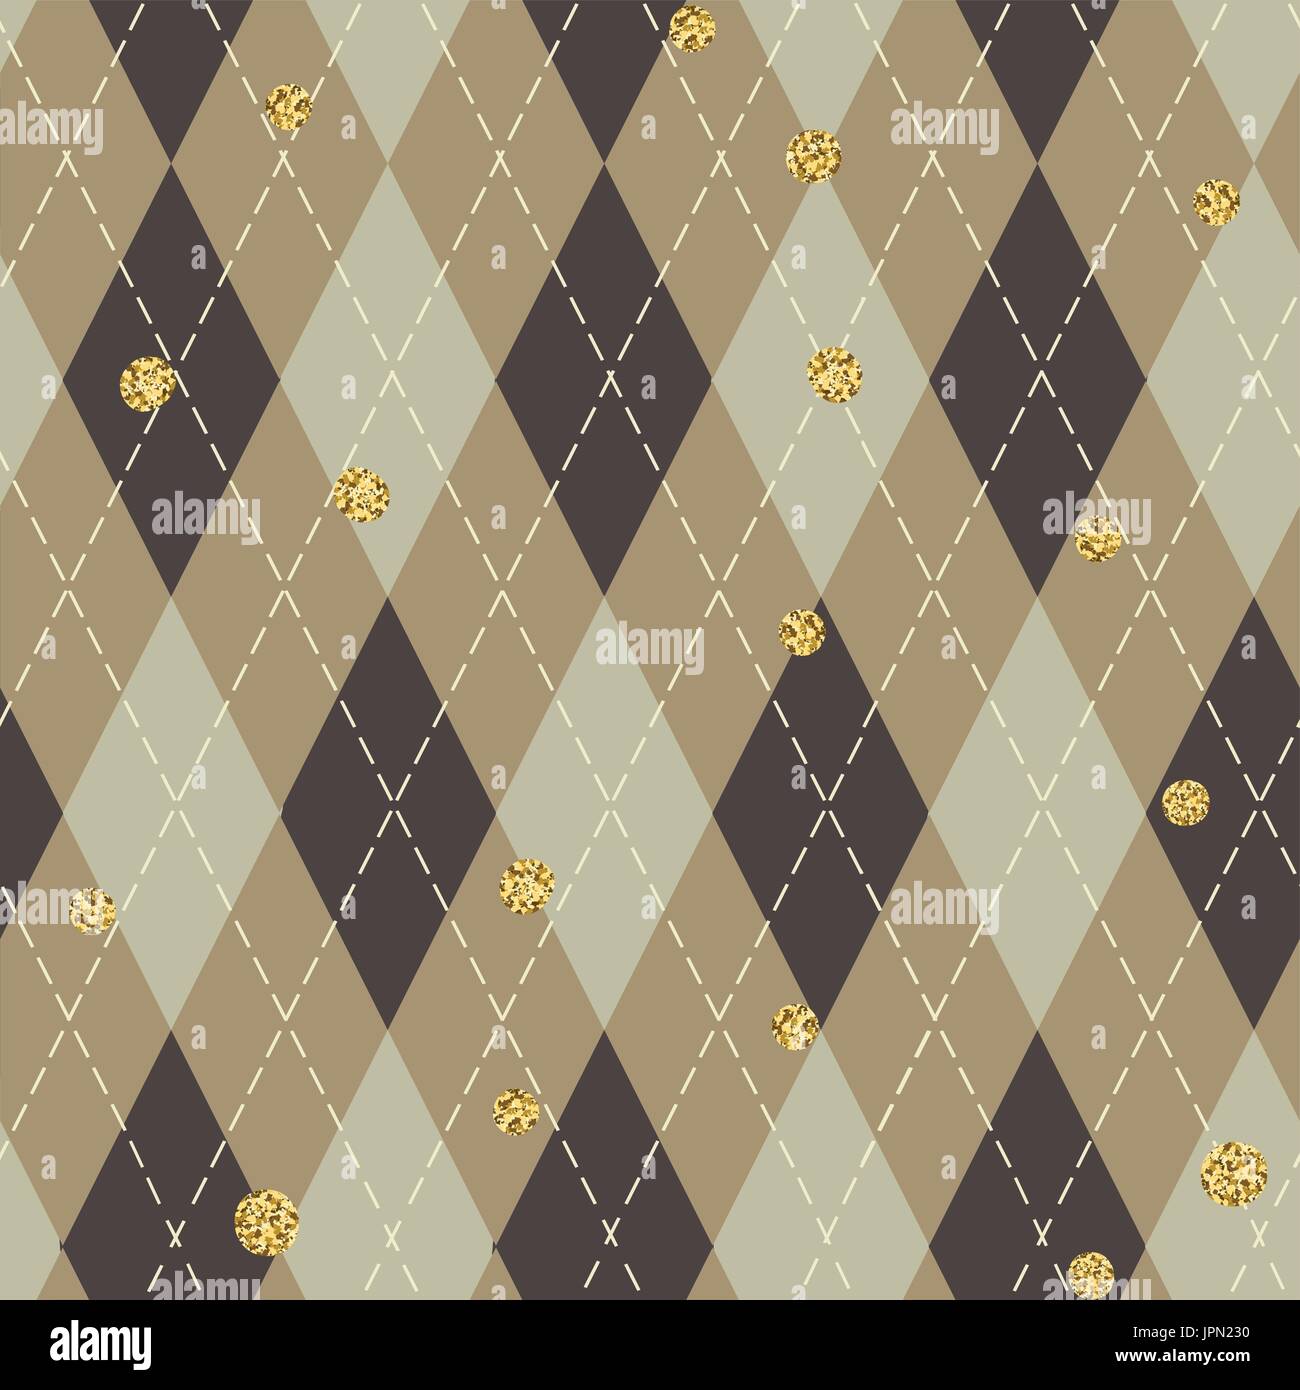 Seamless blue argyle pattern with chaotic golden dots. Traditional diamond check print. Vintage seamless background. Stock Vector